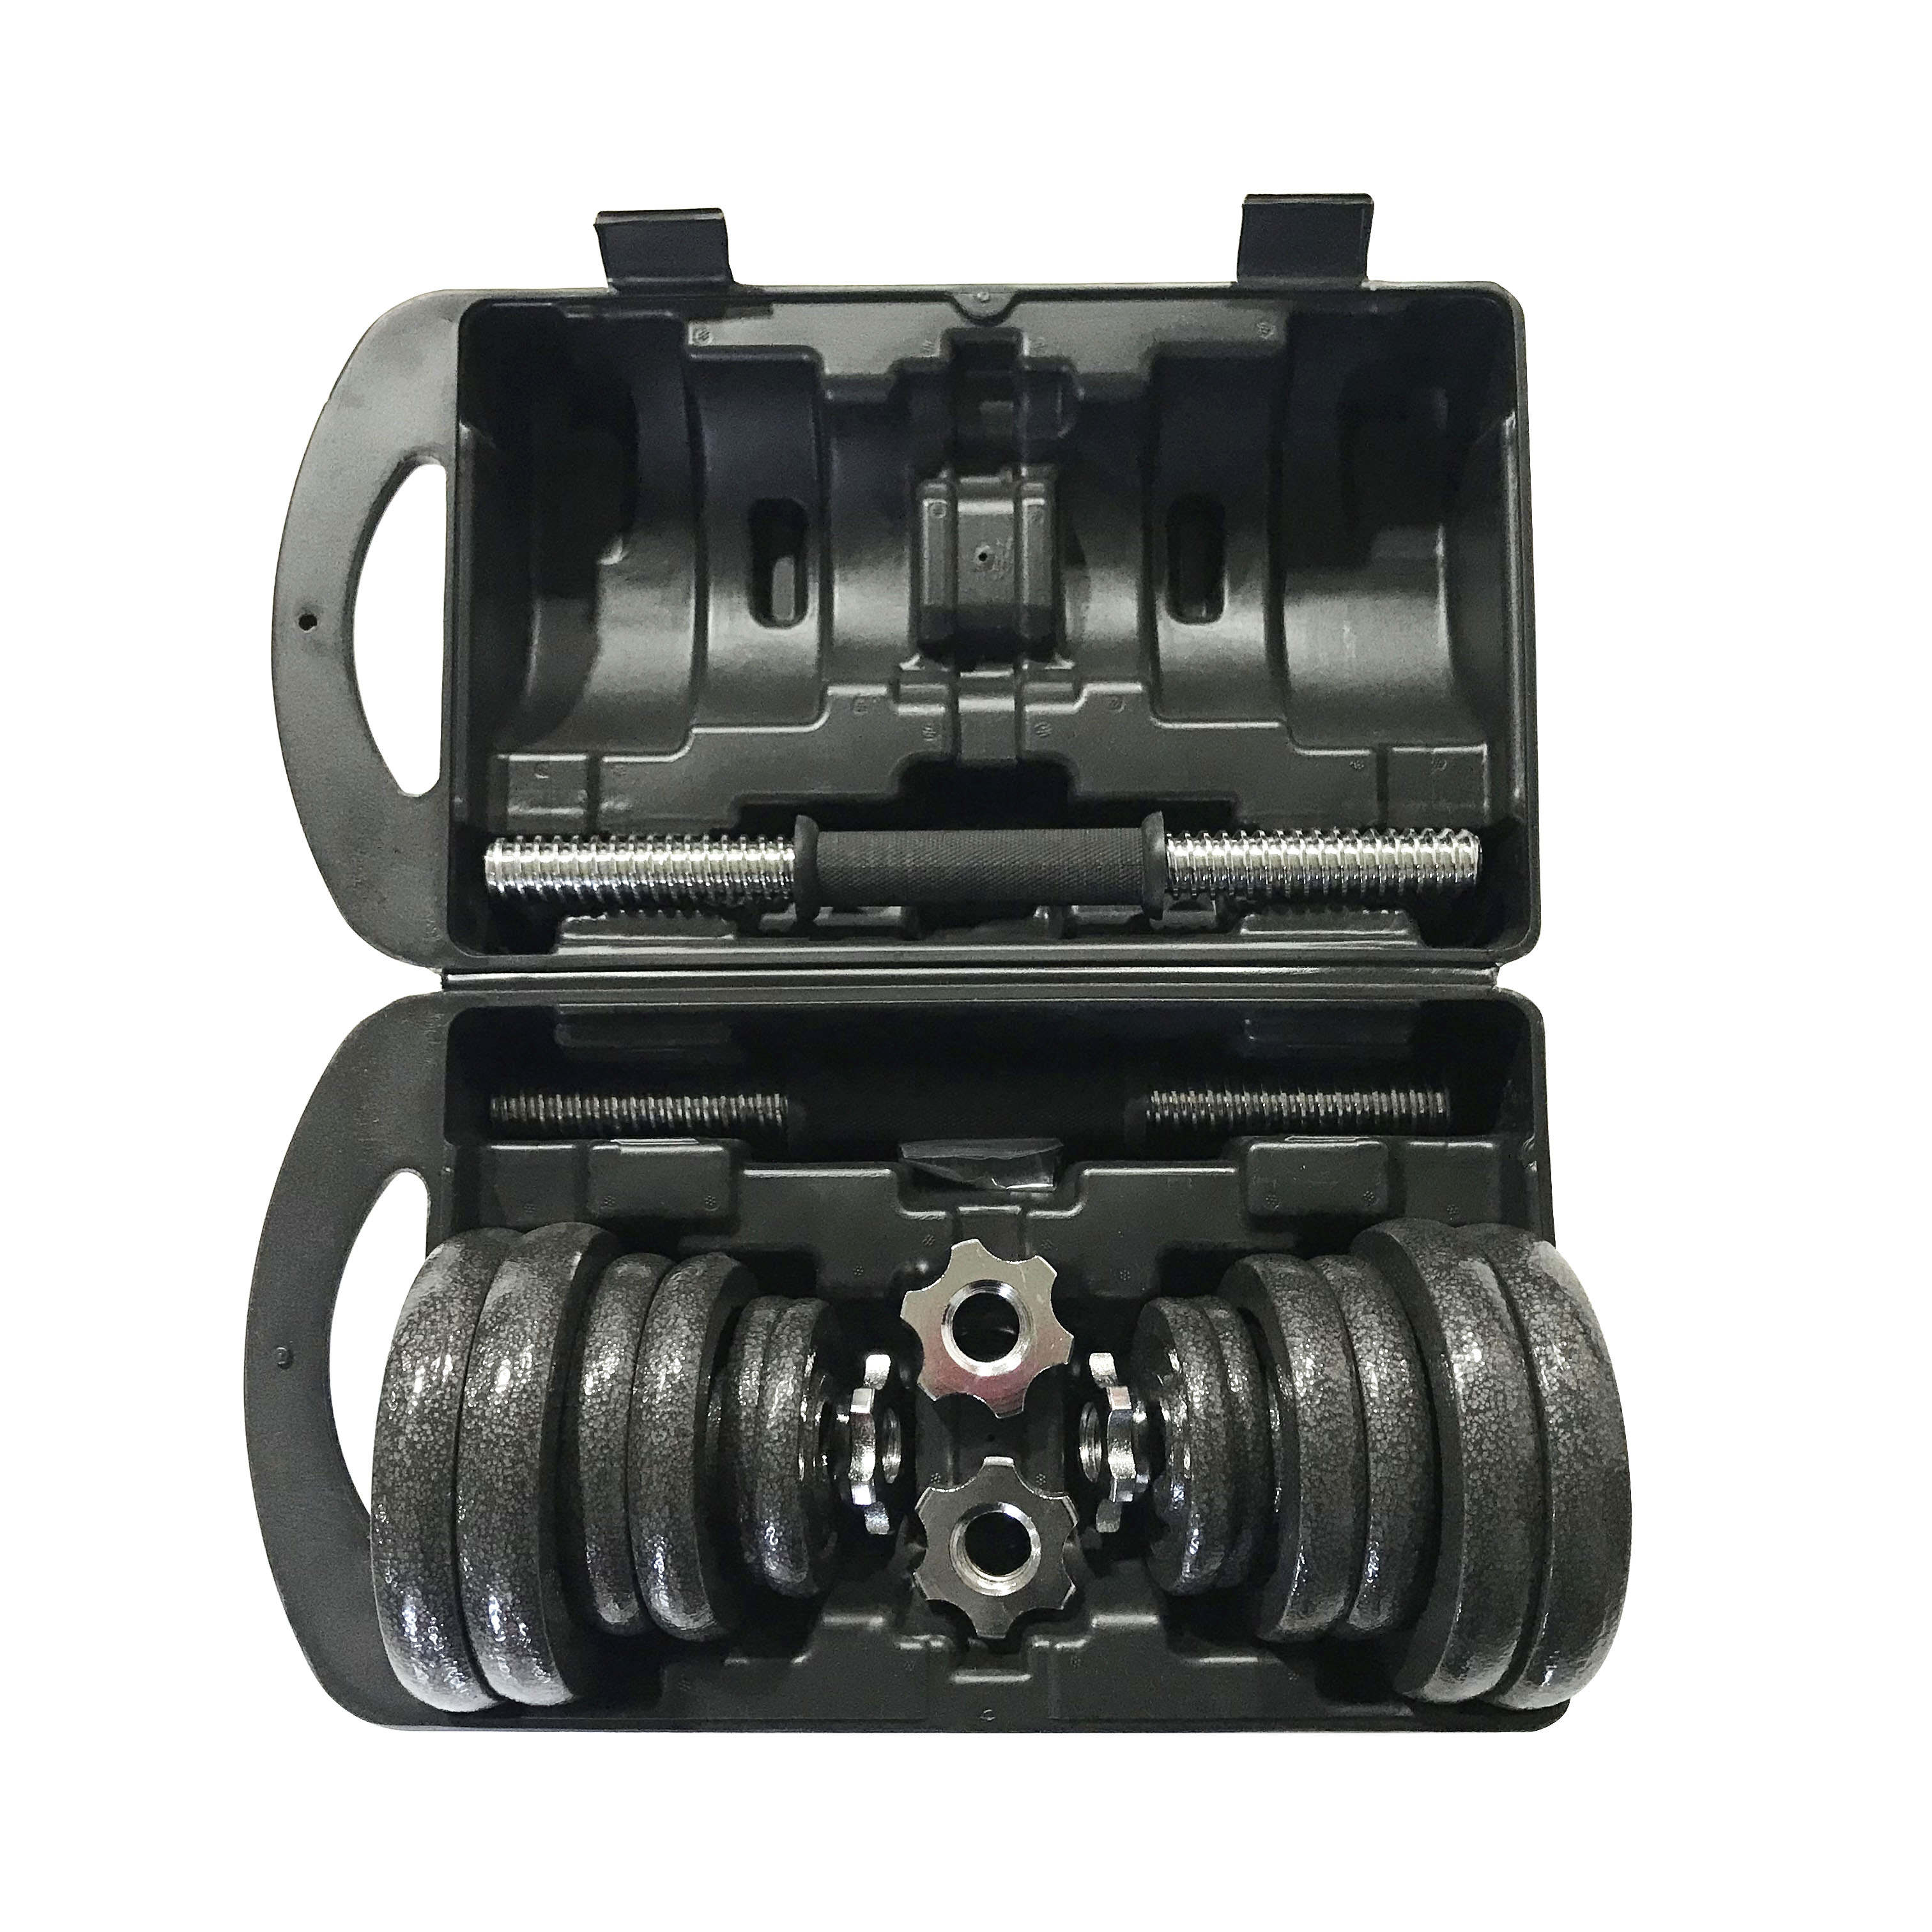 Hot sale gym weightlifting cast iron adjustable dumbbell 40kg black painted dumbbell set with plastic box